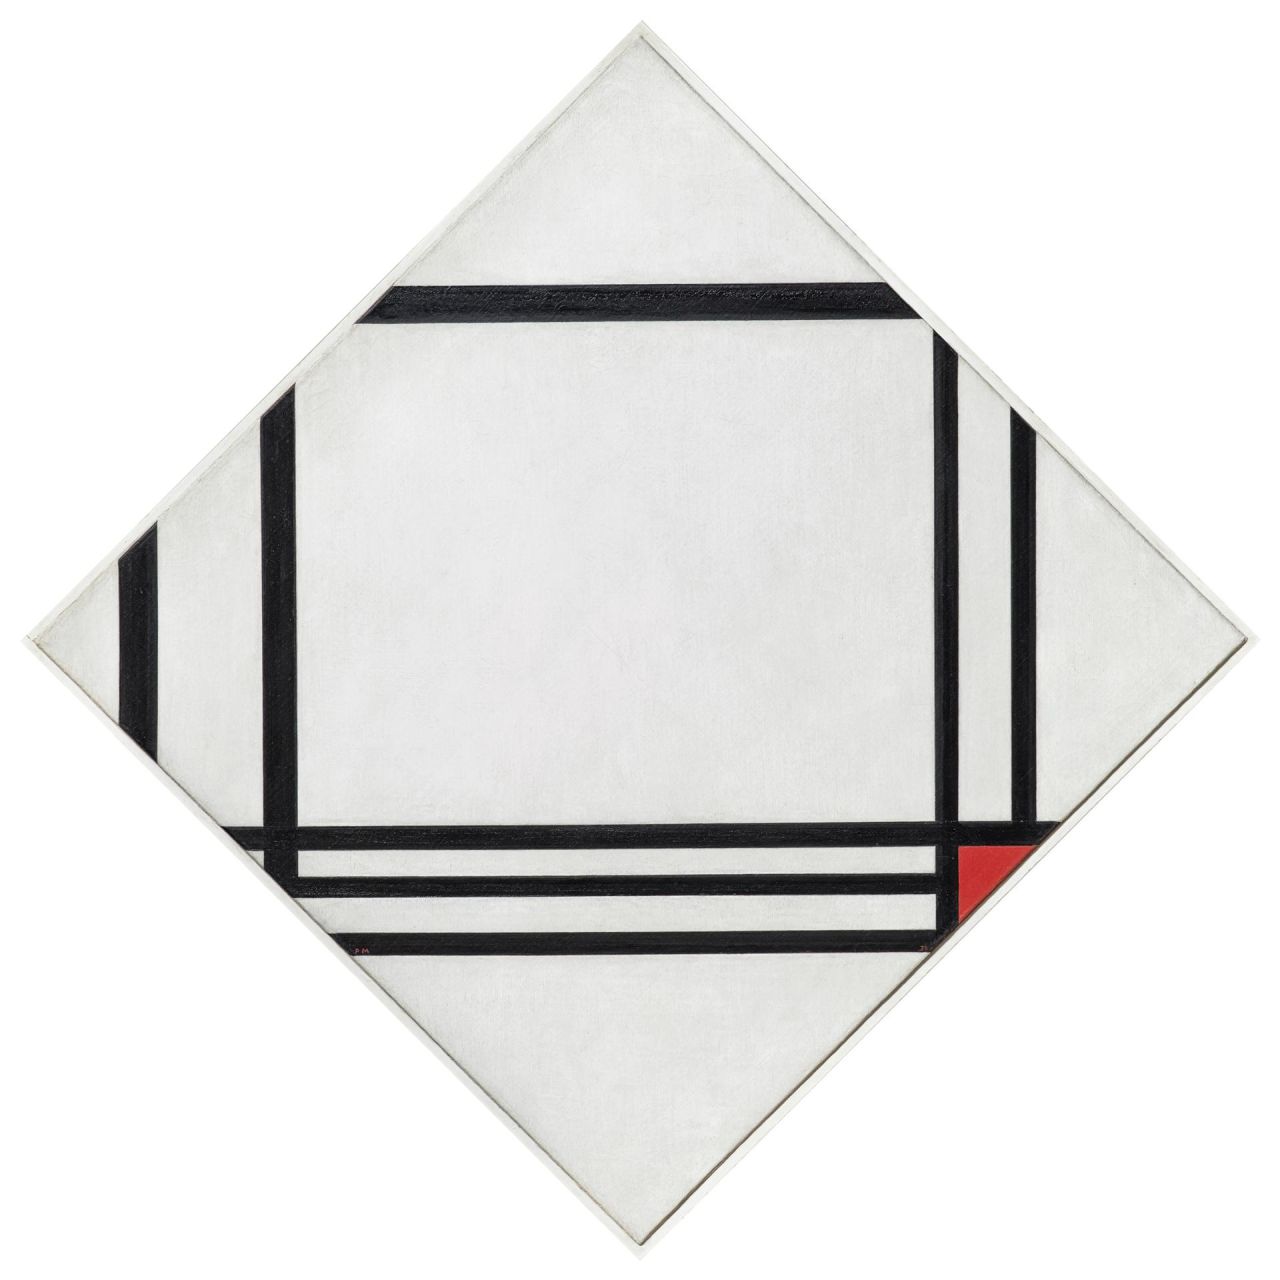 Piet Mondrian, "Lozenge Composition with Eight Lines and Red (Picture no. III)," 1938.